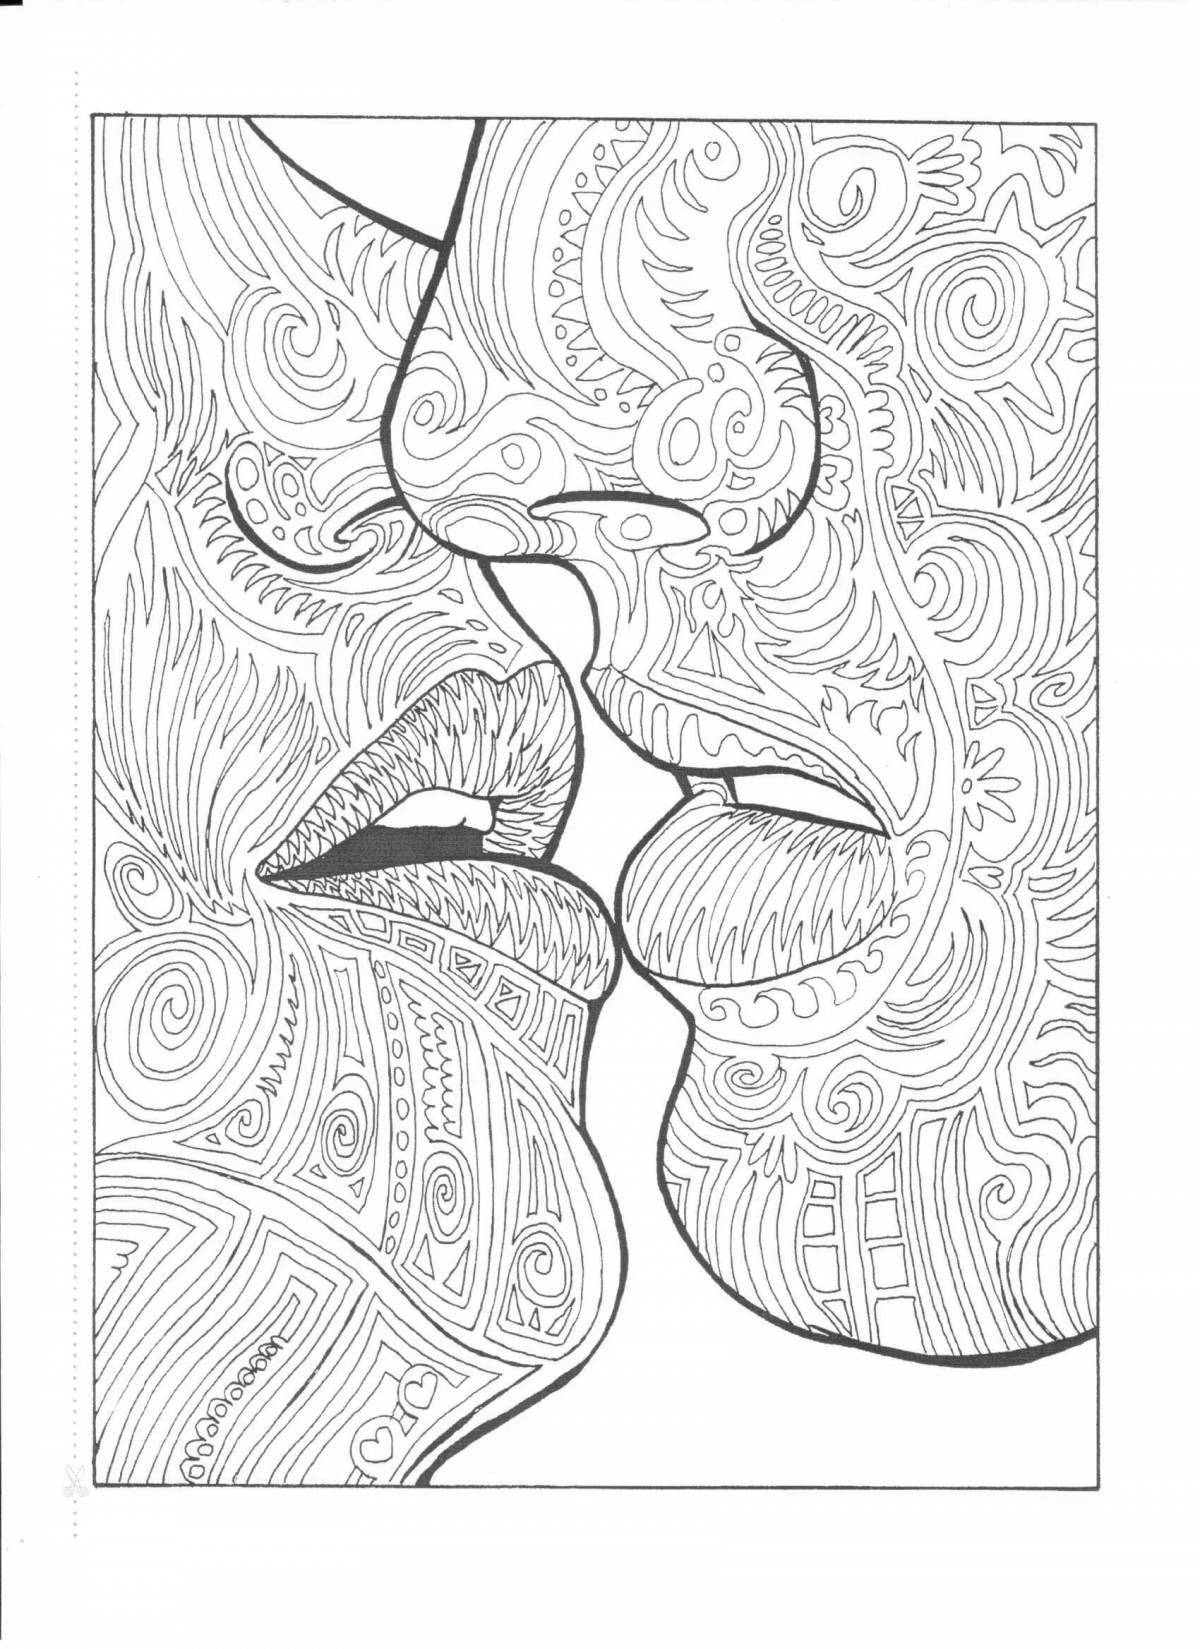 A fascinating psychological coloring book for adults